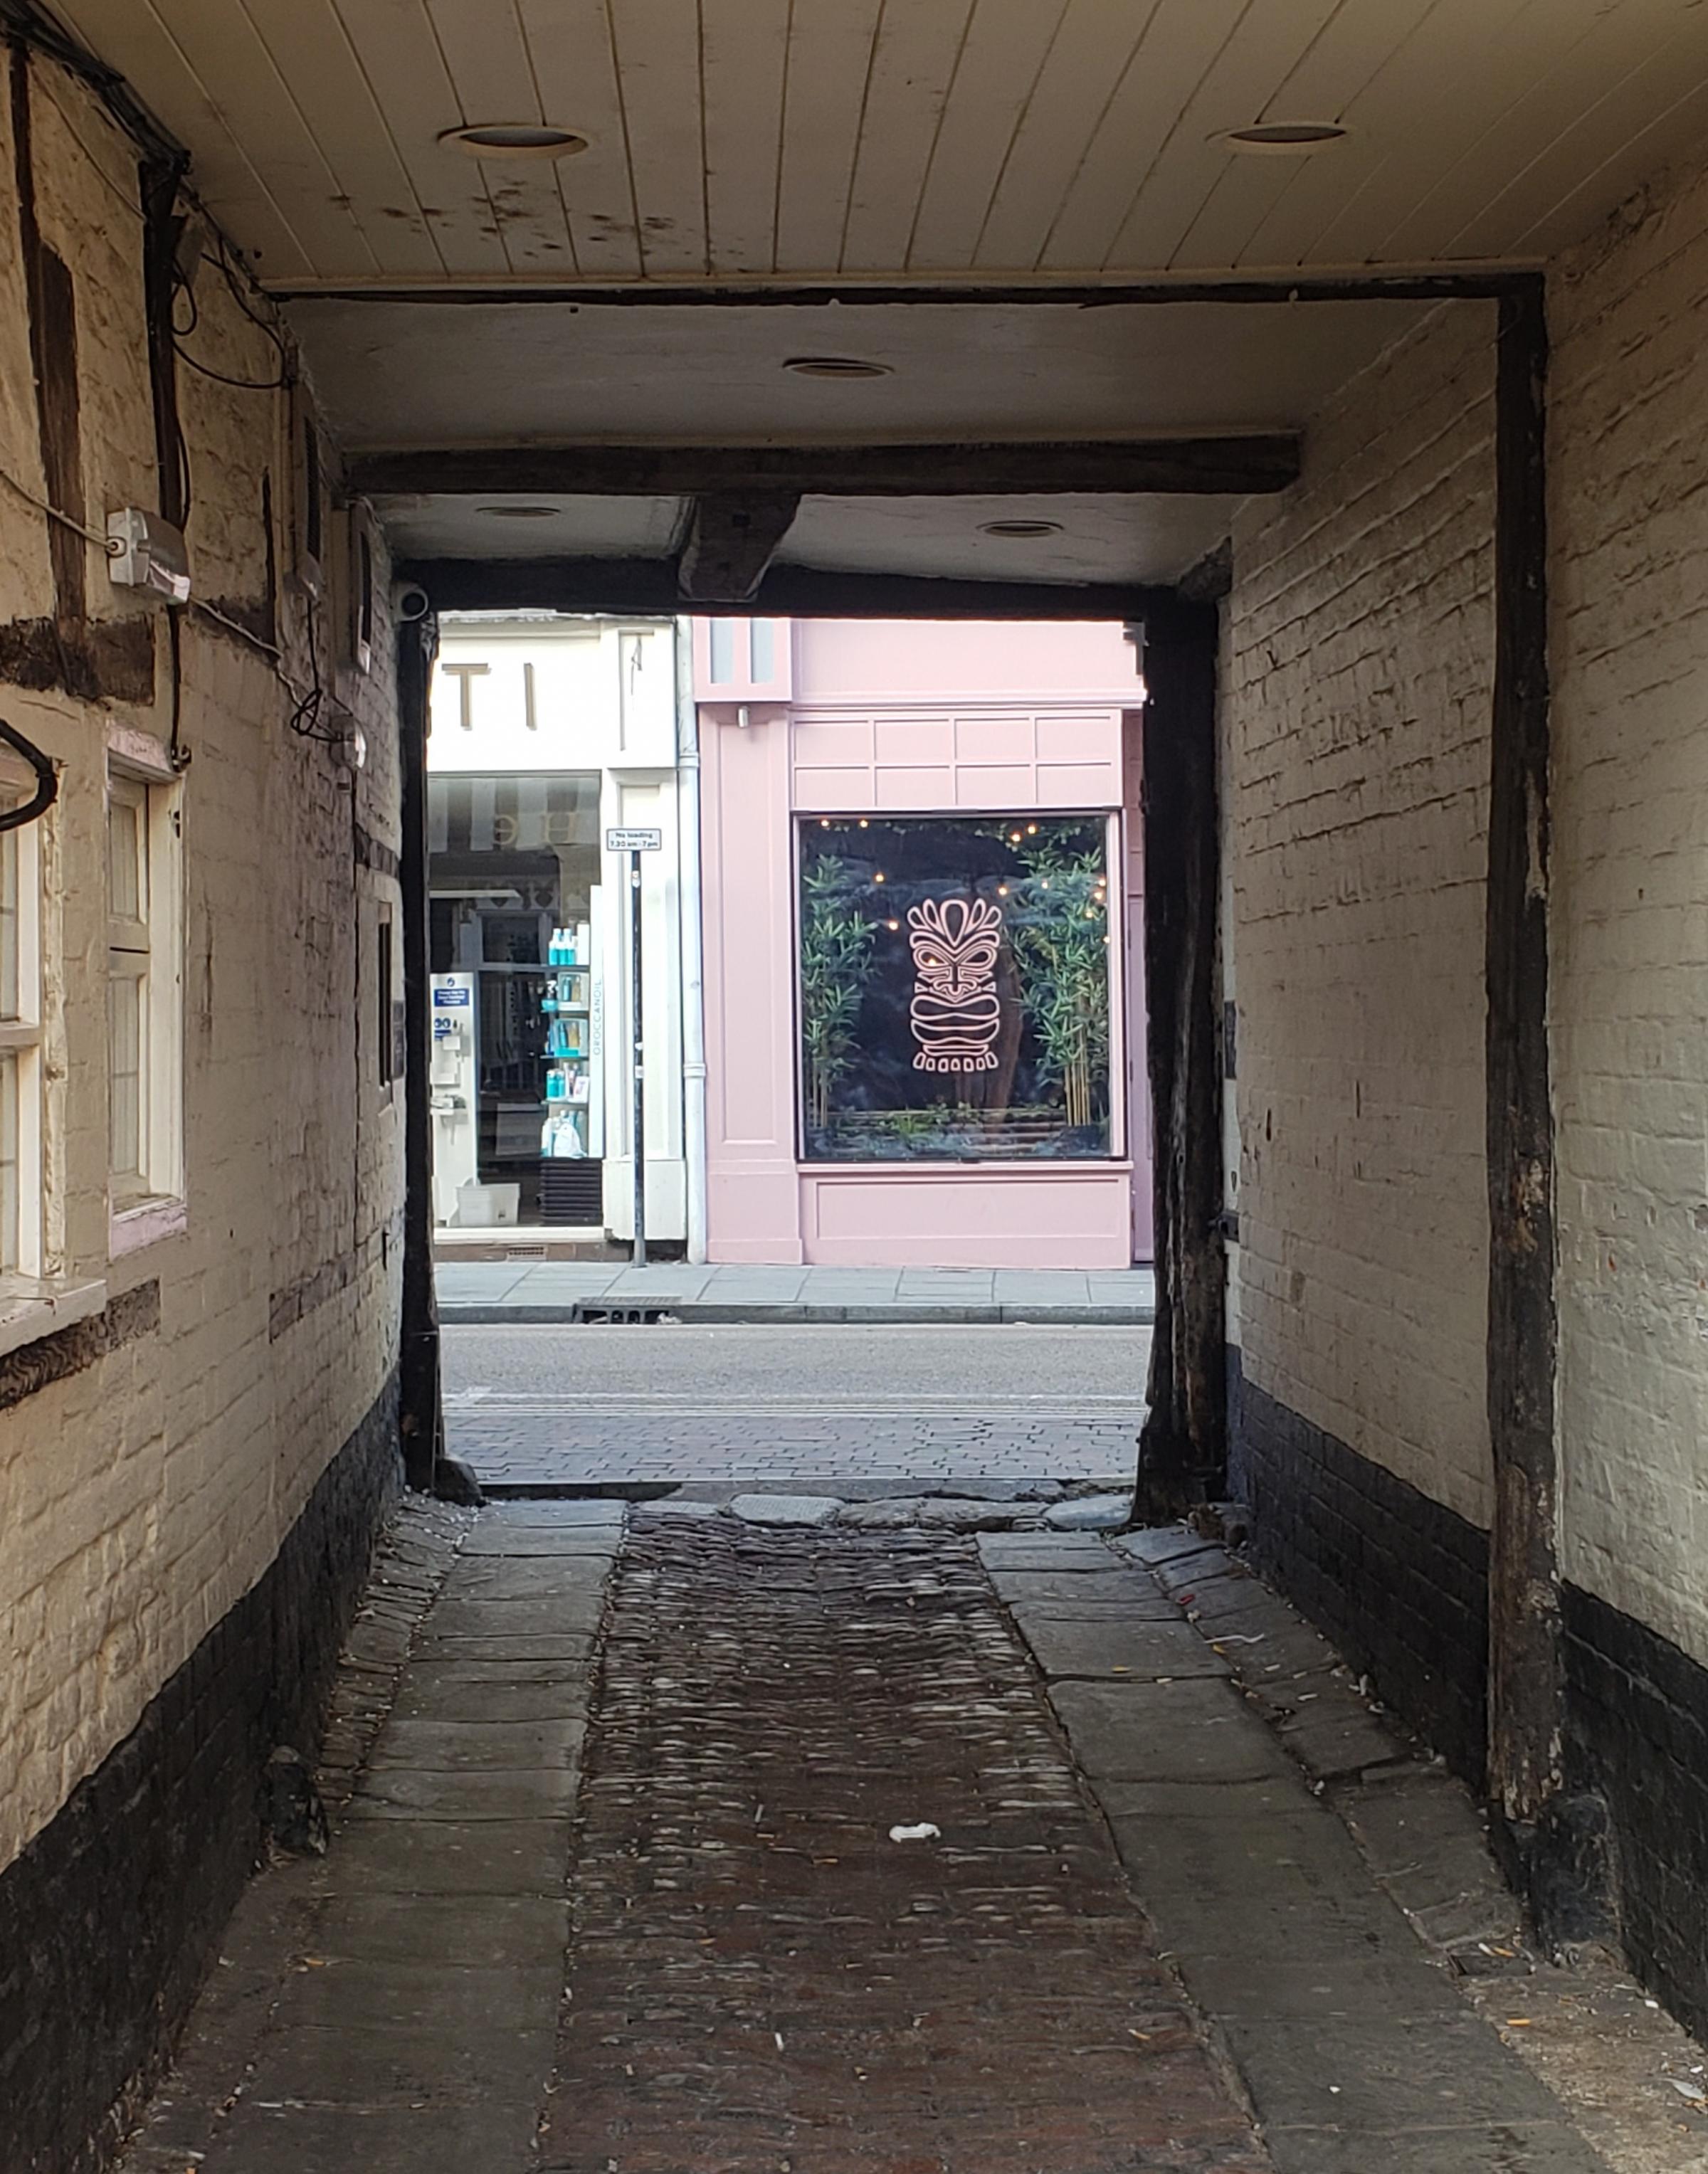 Where in Worcester will you find this passageway?